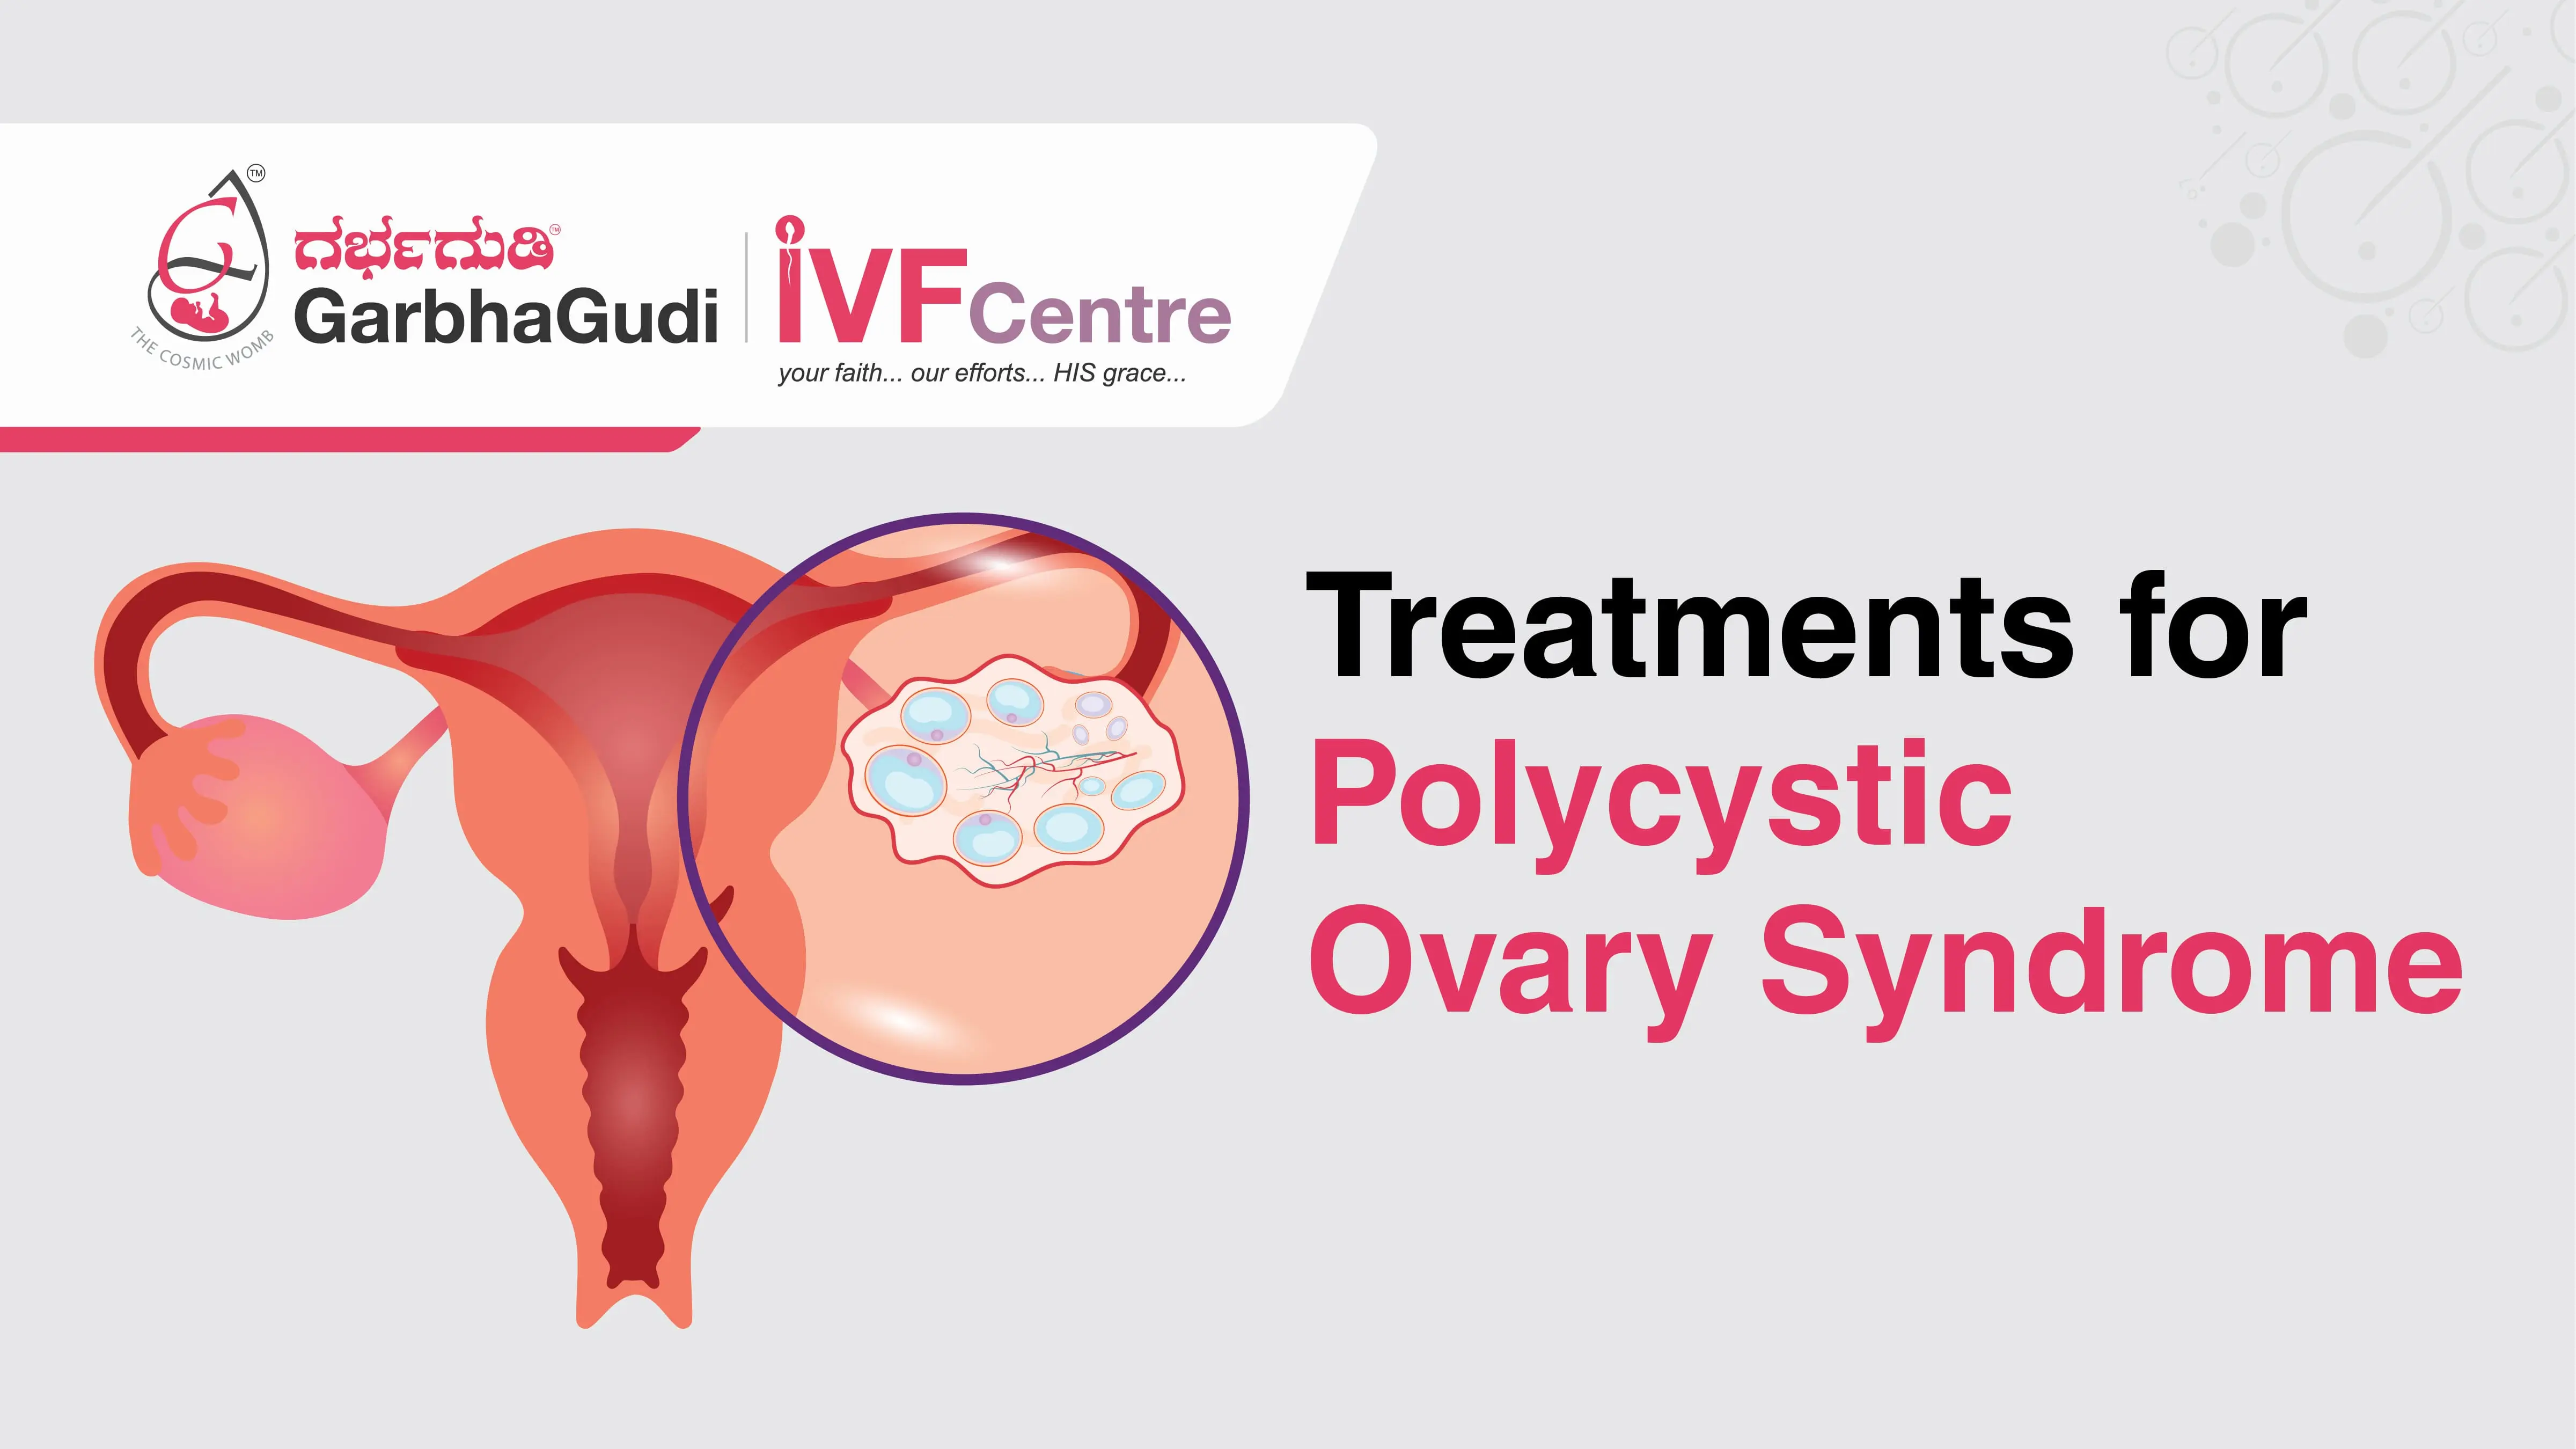 Treatments for Polycystic Ovary Syndrome